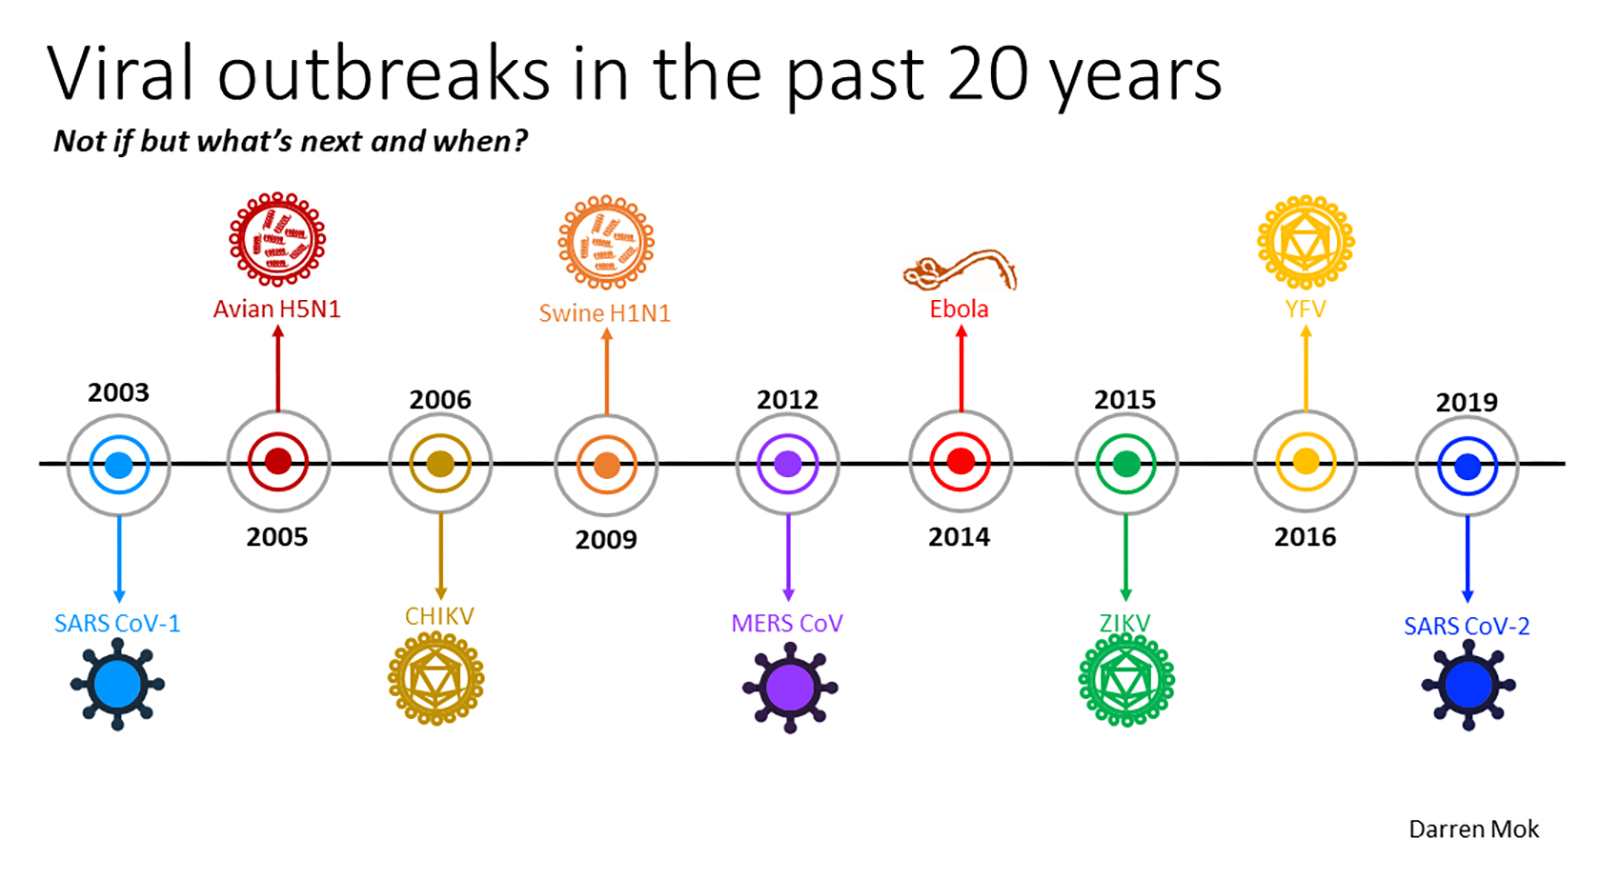 Viral outbreaks in the past 20 years